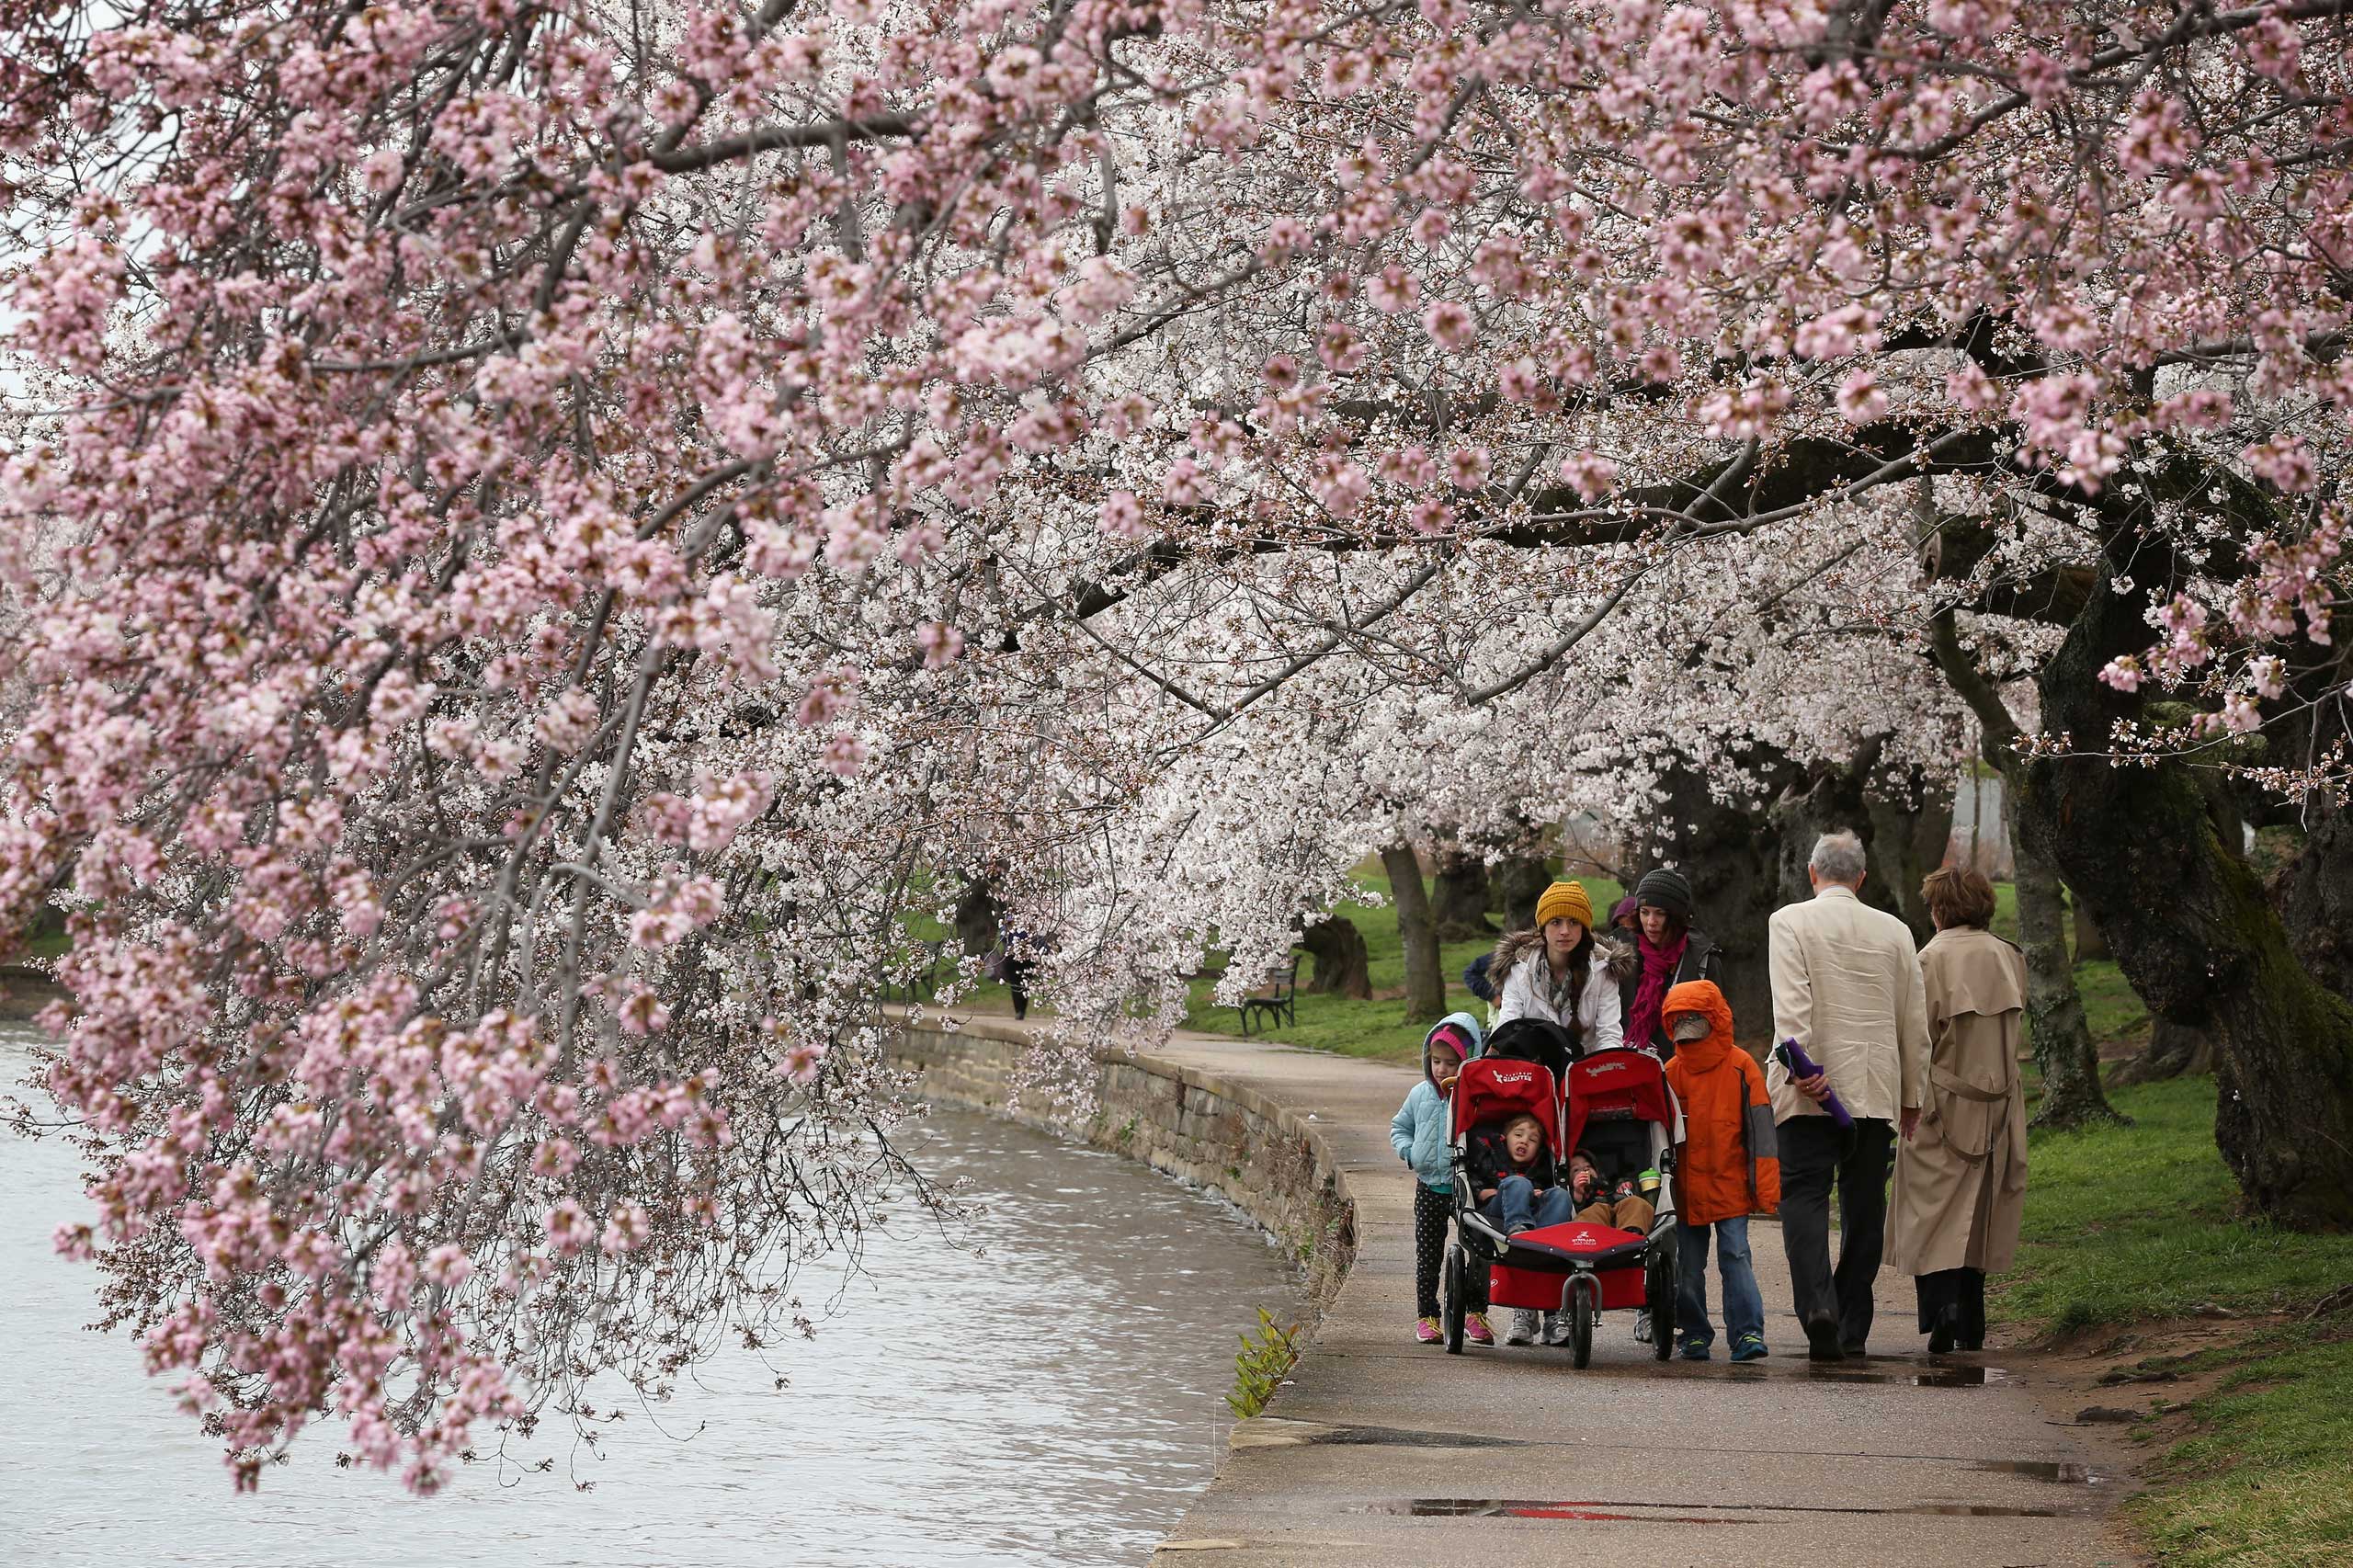 People walk past a blooming Cherry Blossom trees at the Tidal Basin in Washington, D.C. on April 8, 2015.